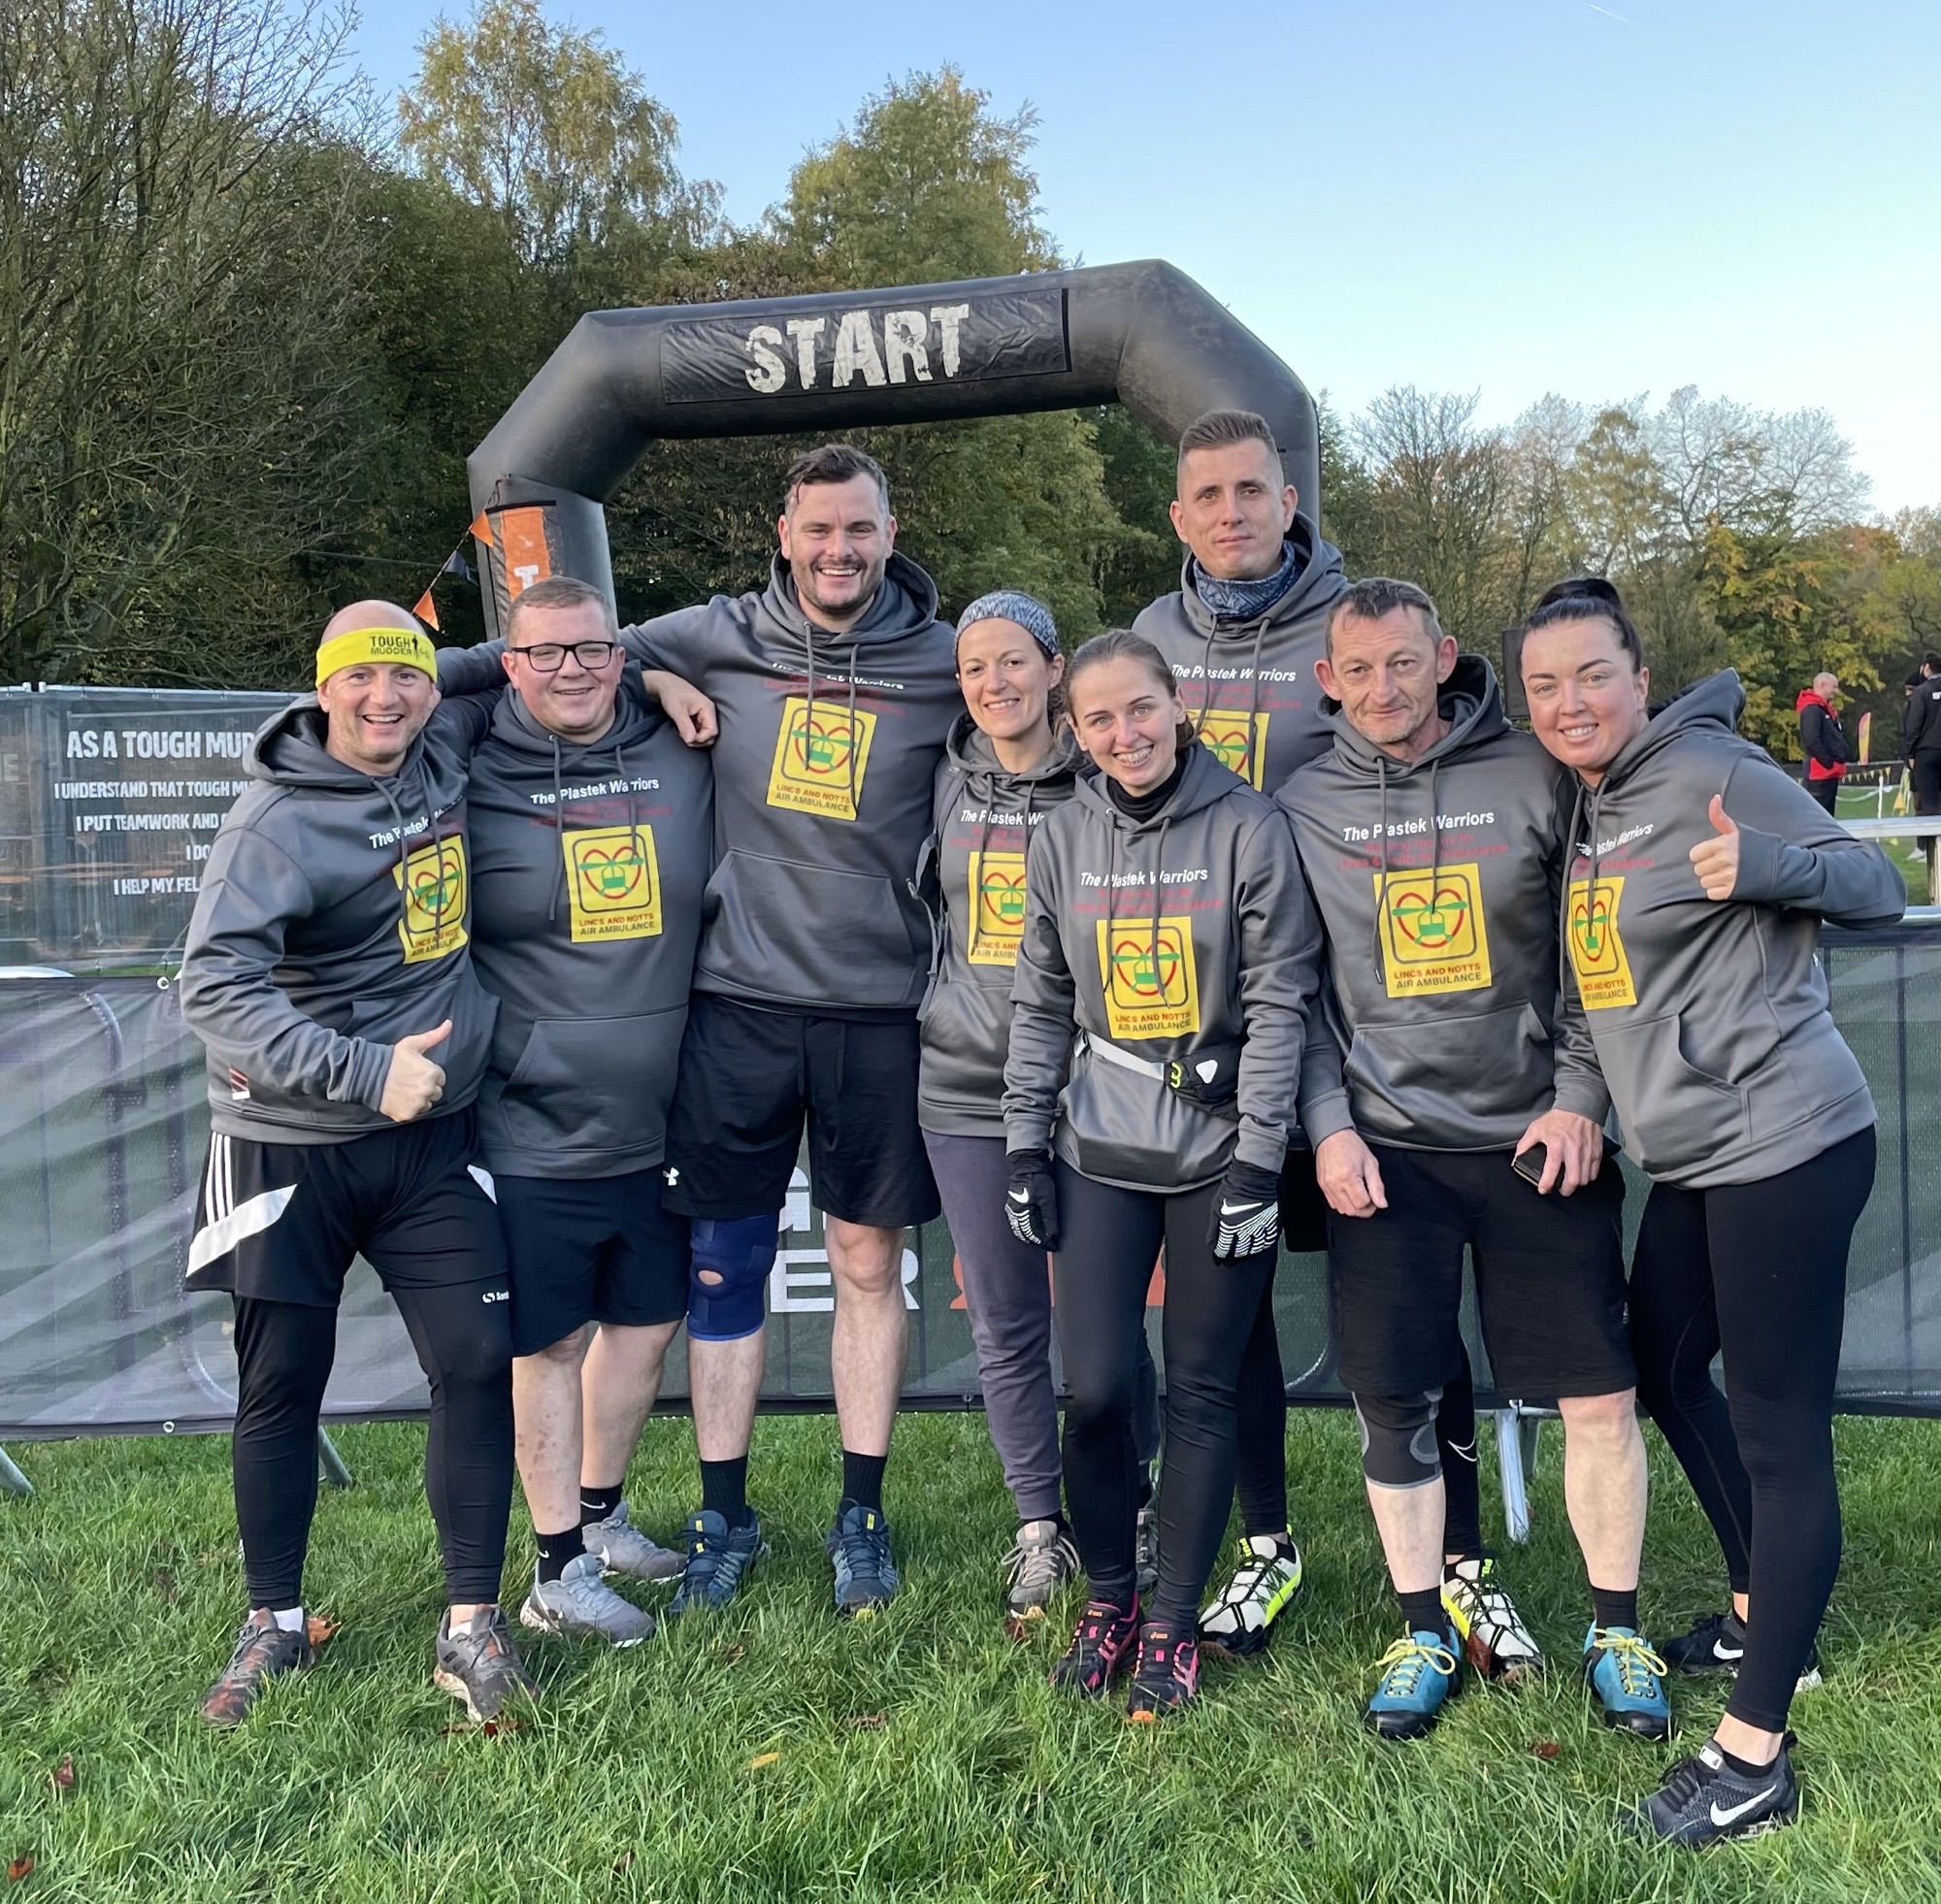 Fundraisers at the start of a mud run